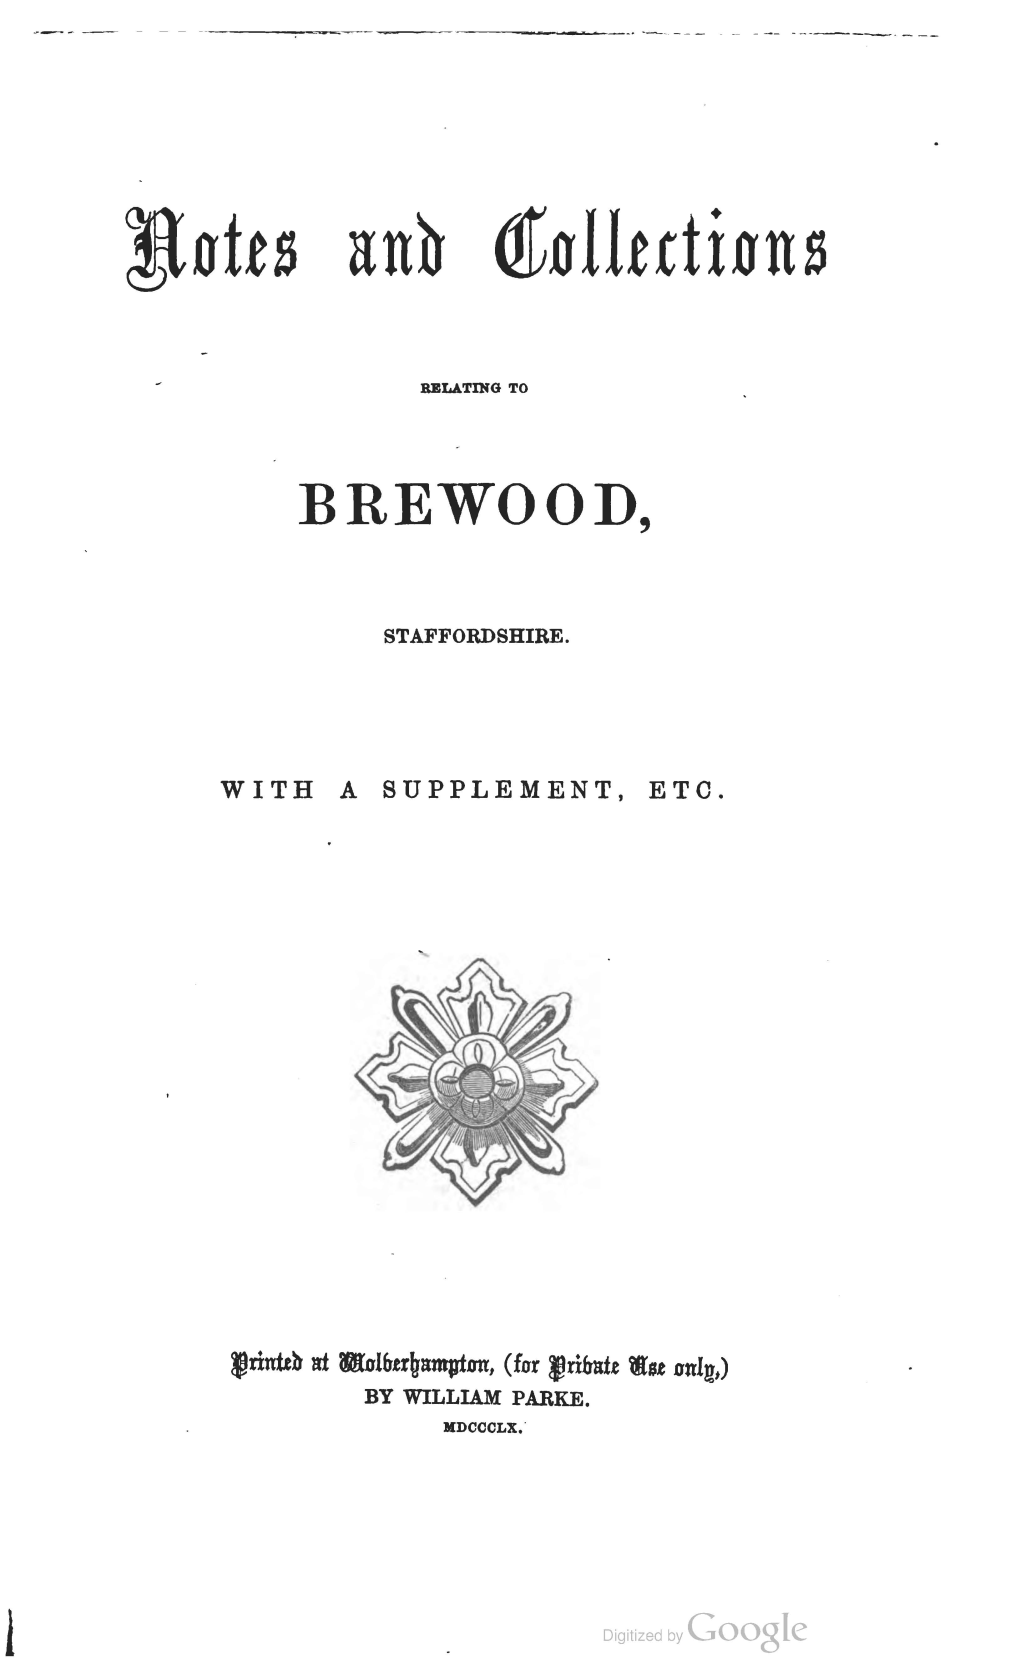 Notes and Collections Relating to Brewood